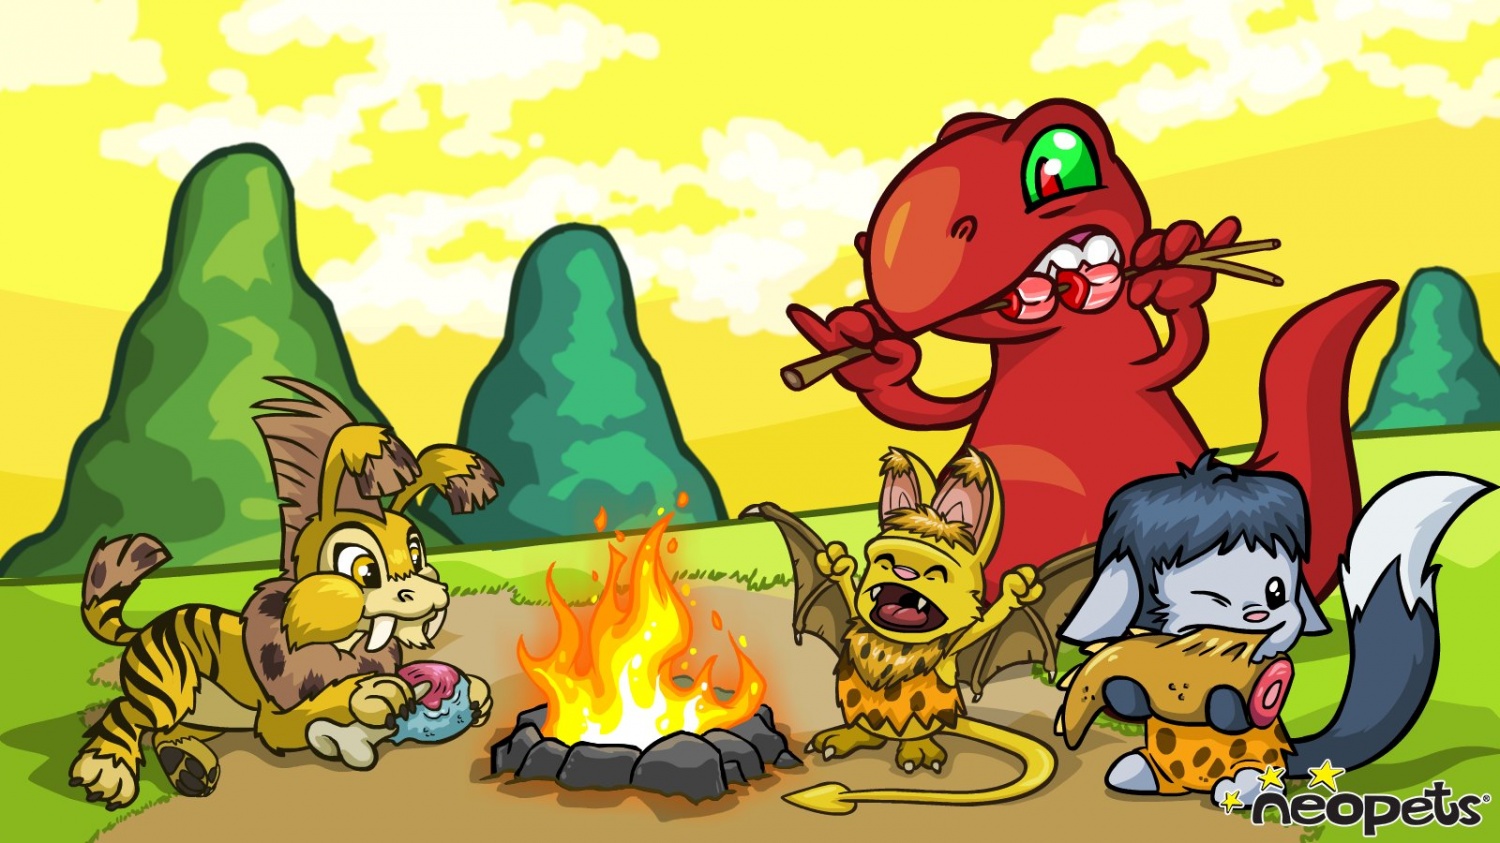 Virtual pet game Neopets returns, but should it stay in the past?, Games